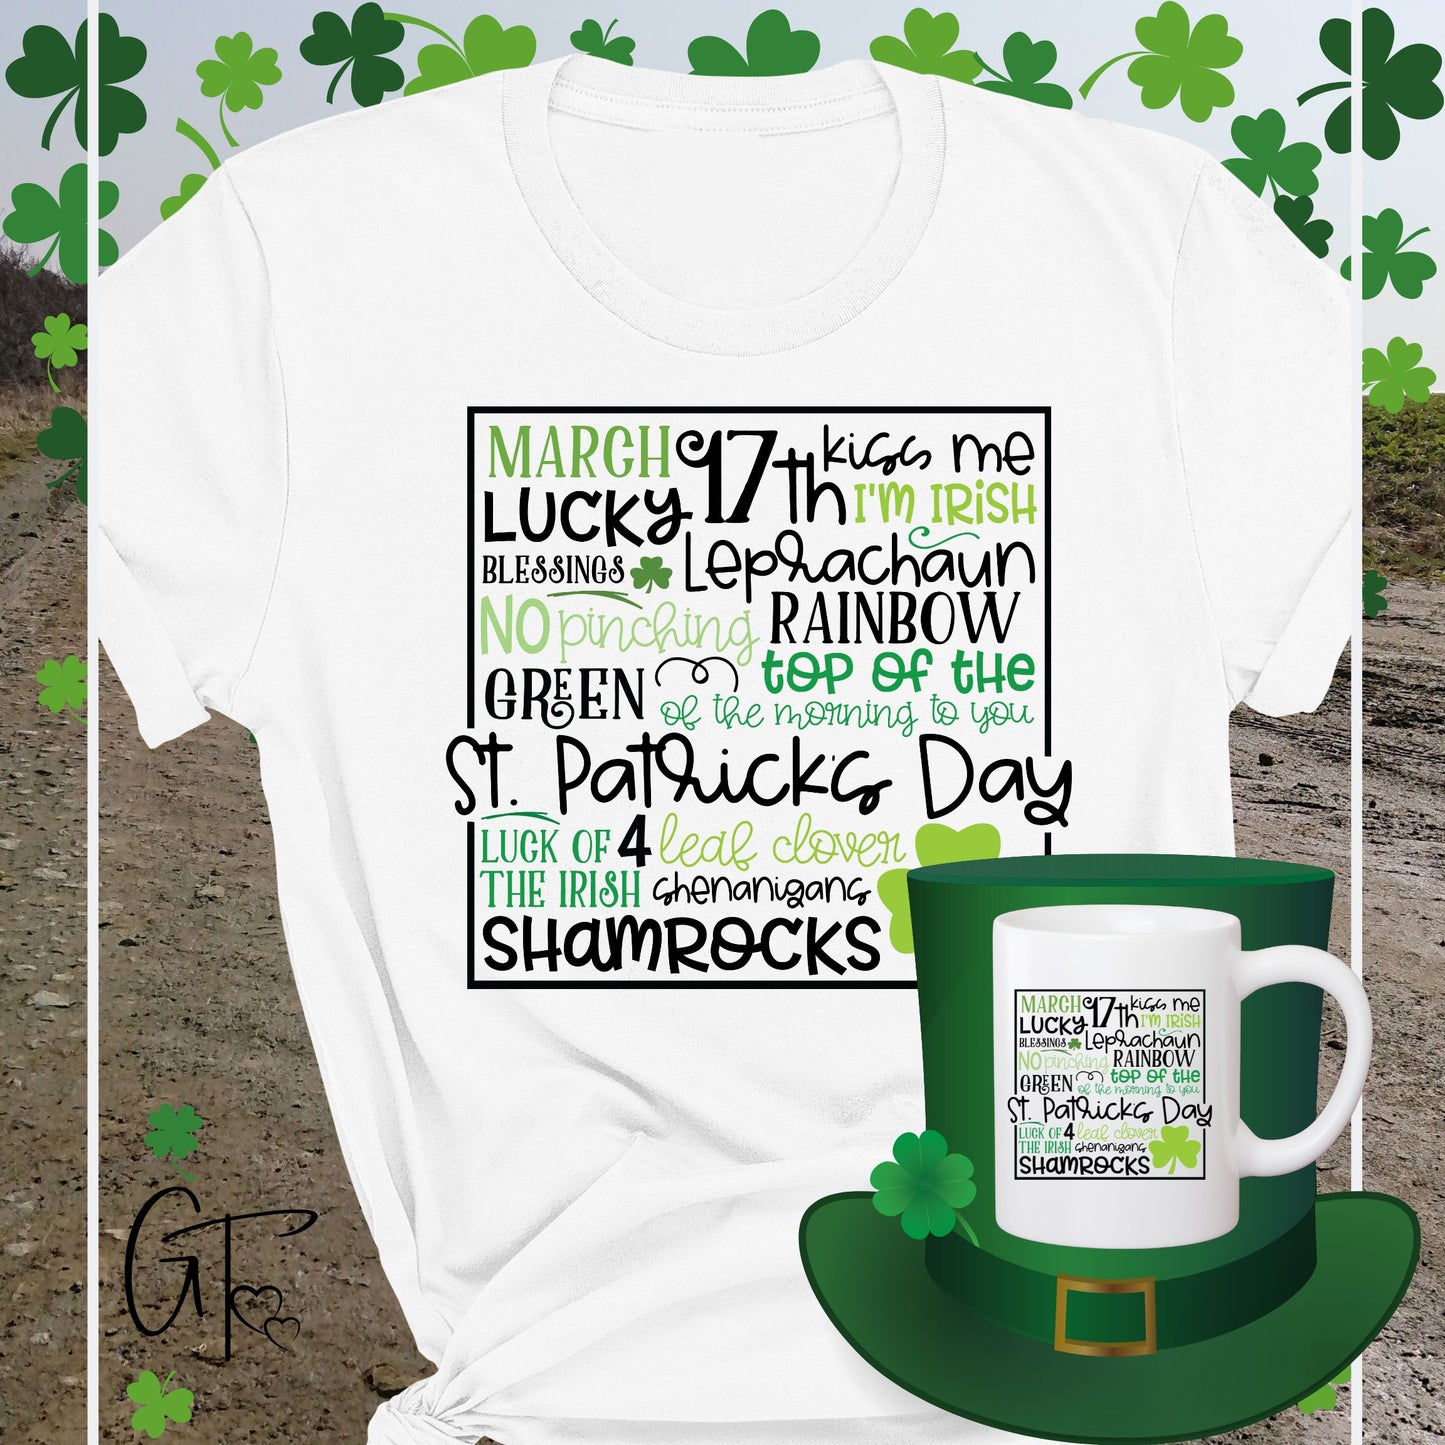 Words for St. Patricks Day Ready to Press SUB172